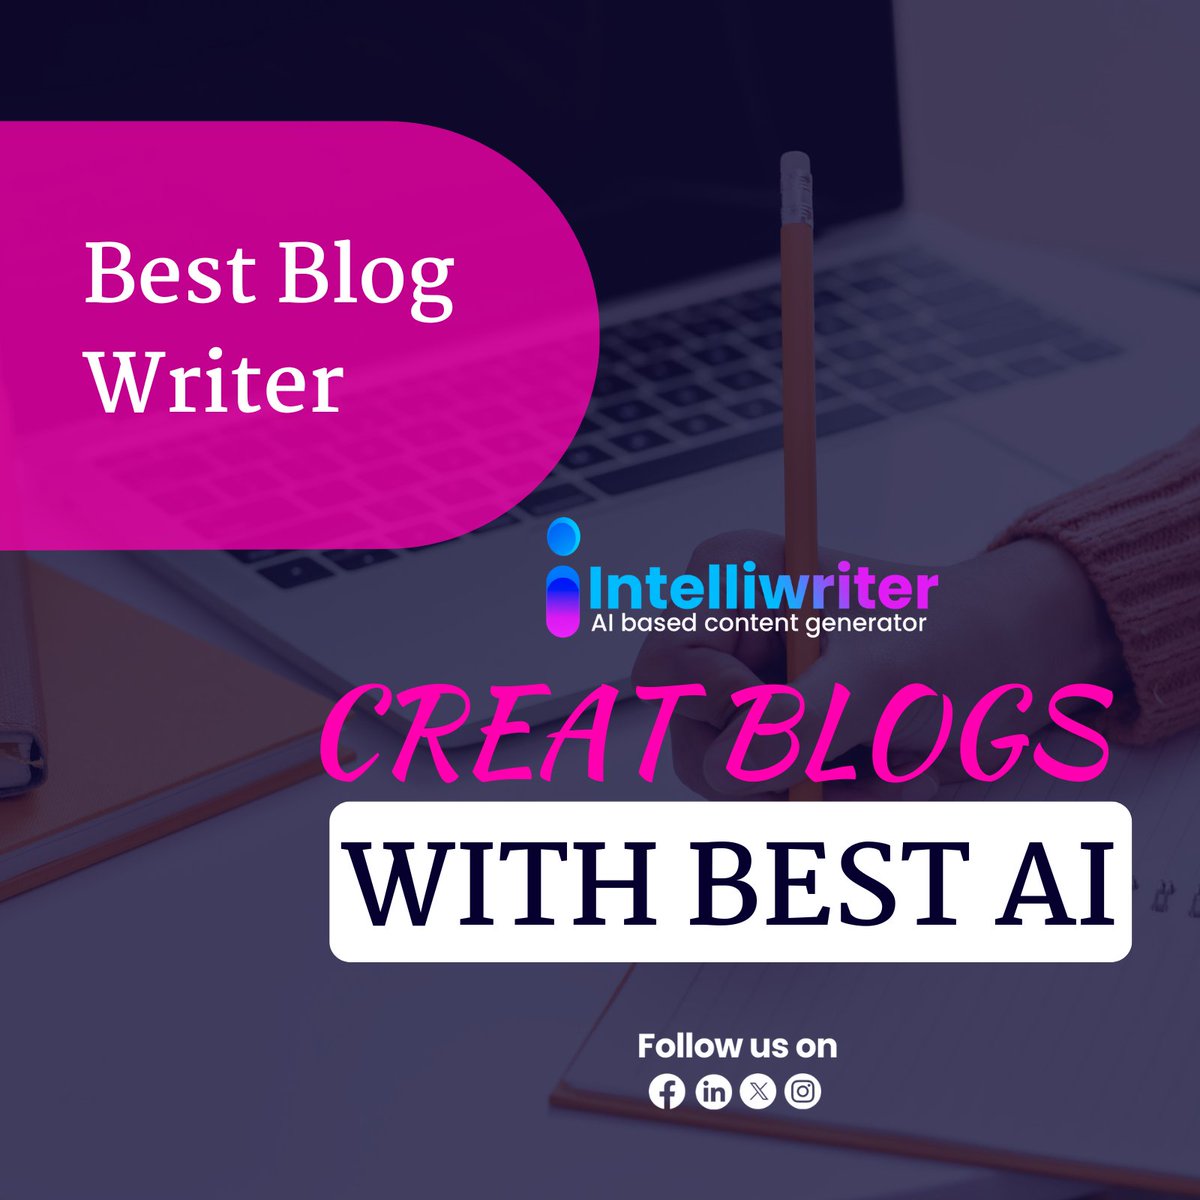 Here's why Intelliwriter is the best blog writer:

- AI-driven creativity: Generate engaging blog posts in minutes, powered by cutting-edge artificial intelligence technology.

intelliwriter.io

#Intelliwriter #AIbasedcontentgenerator #AIImagenerator #BlogWriter #AIContent